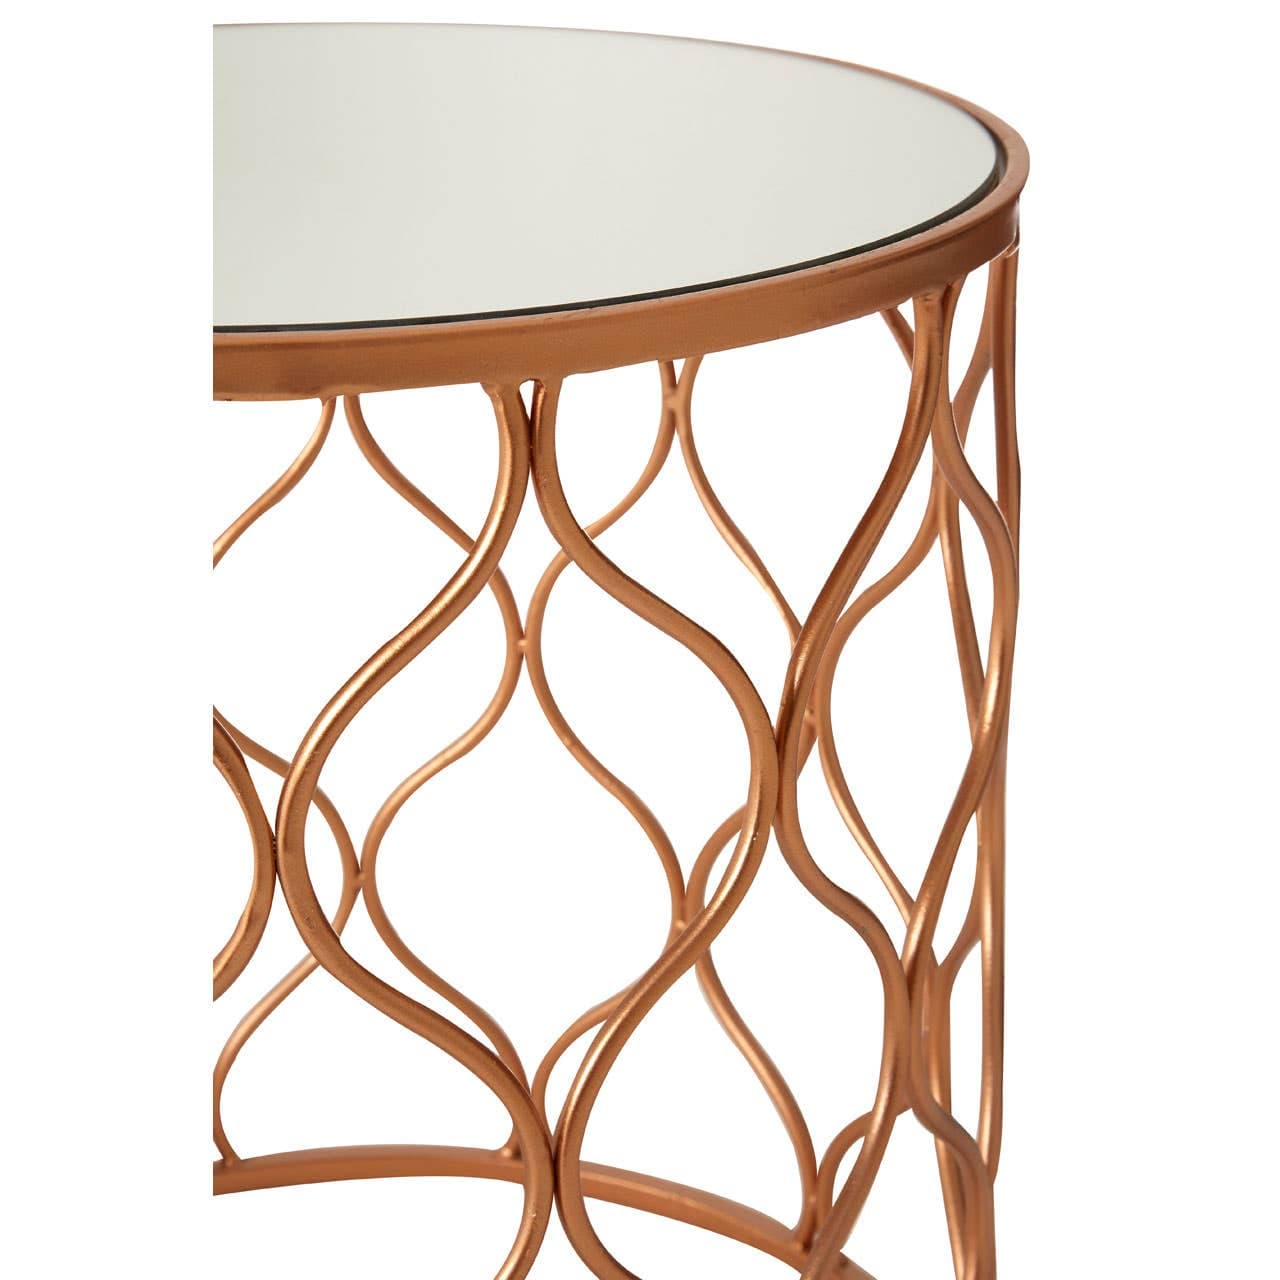 Noosa & Co. Living Avantis Mirrored Top Copper Tables - Set Of 2 House of Isabella UK